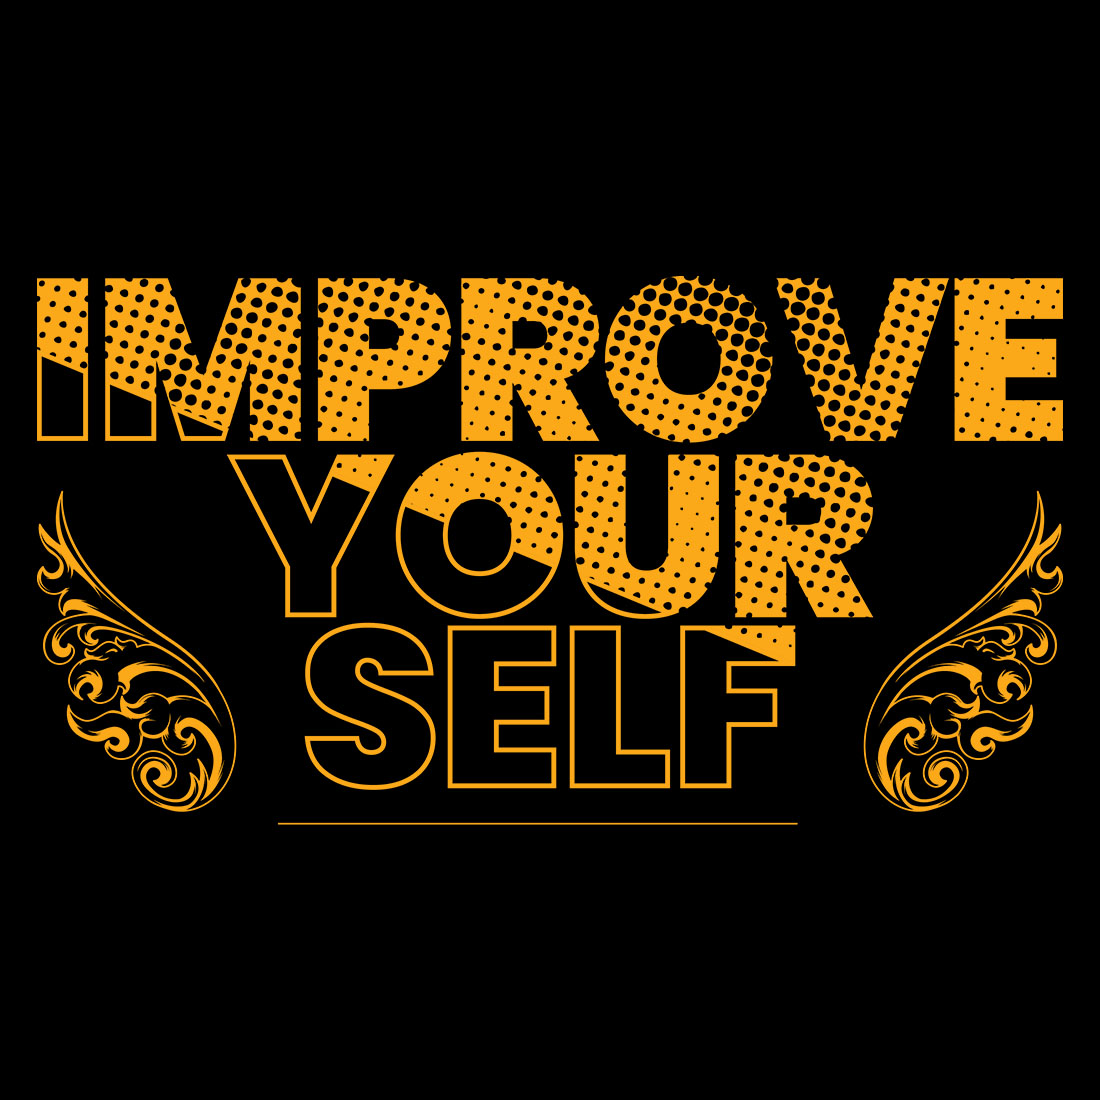 Improve Your Self T-Shirt Design cover image.